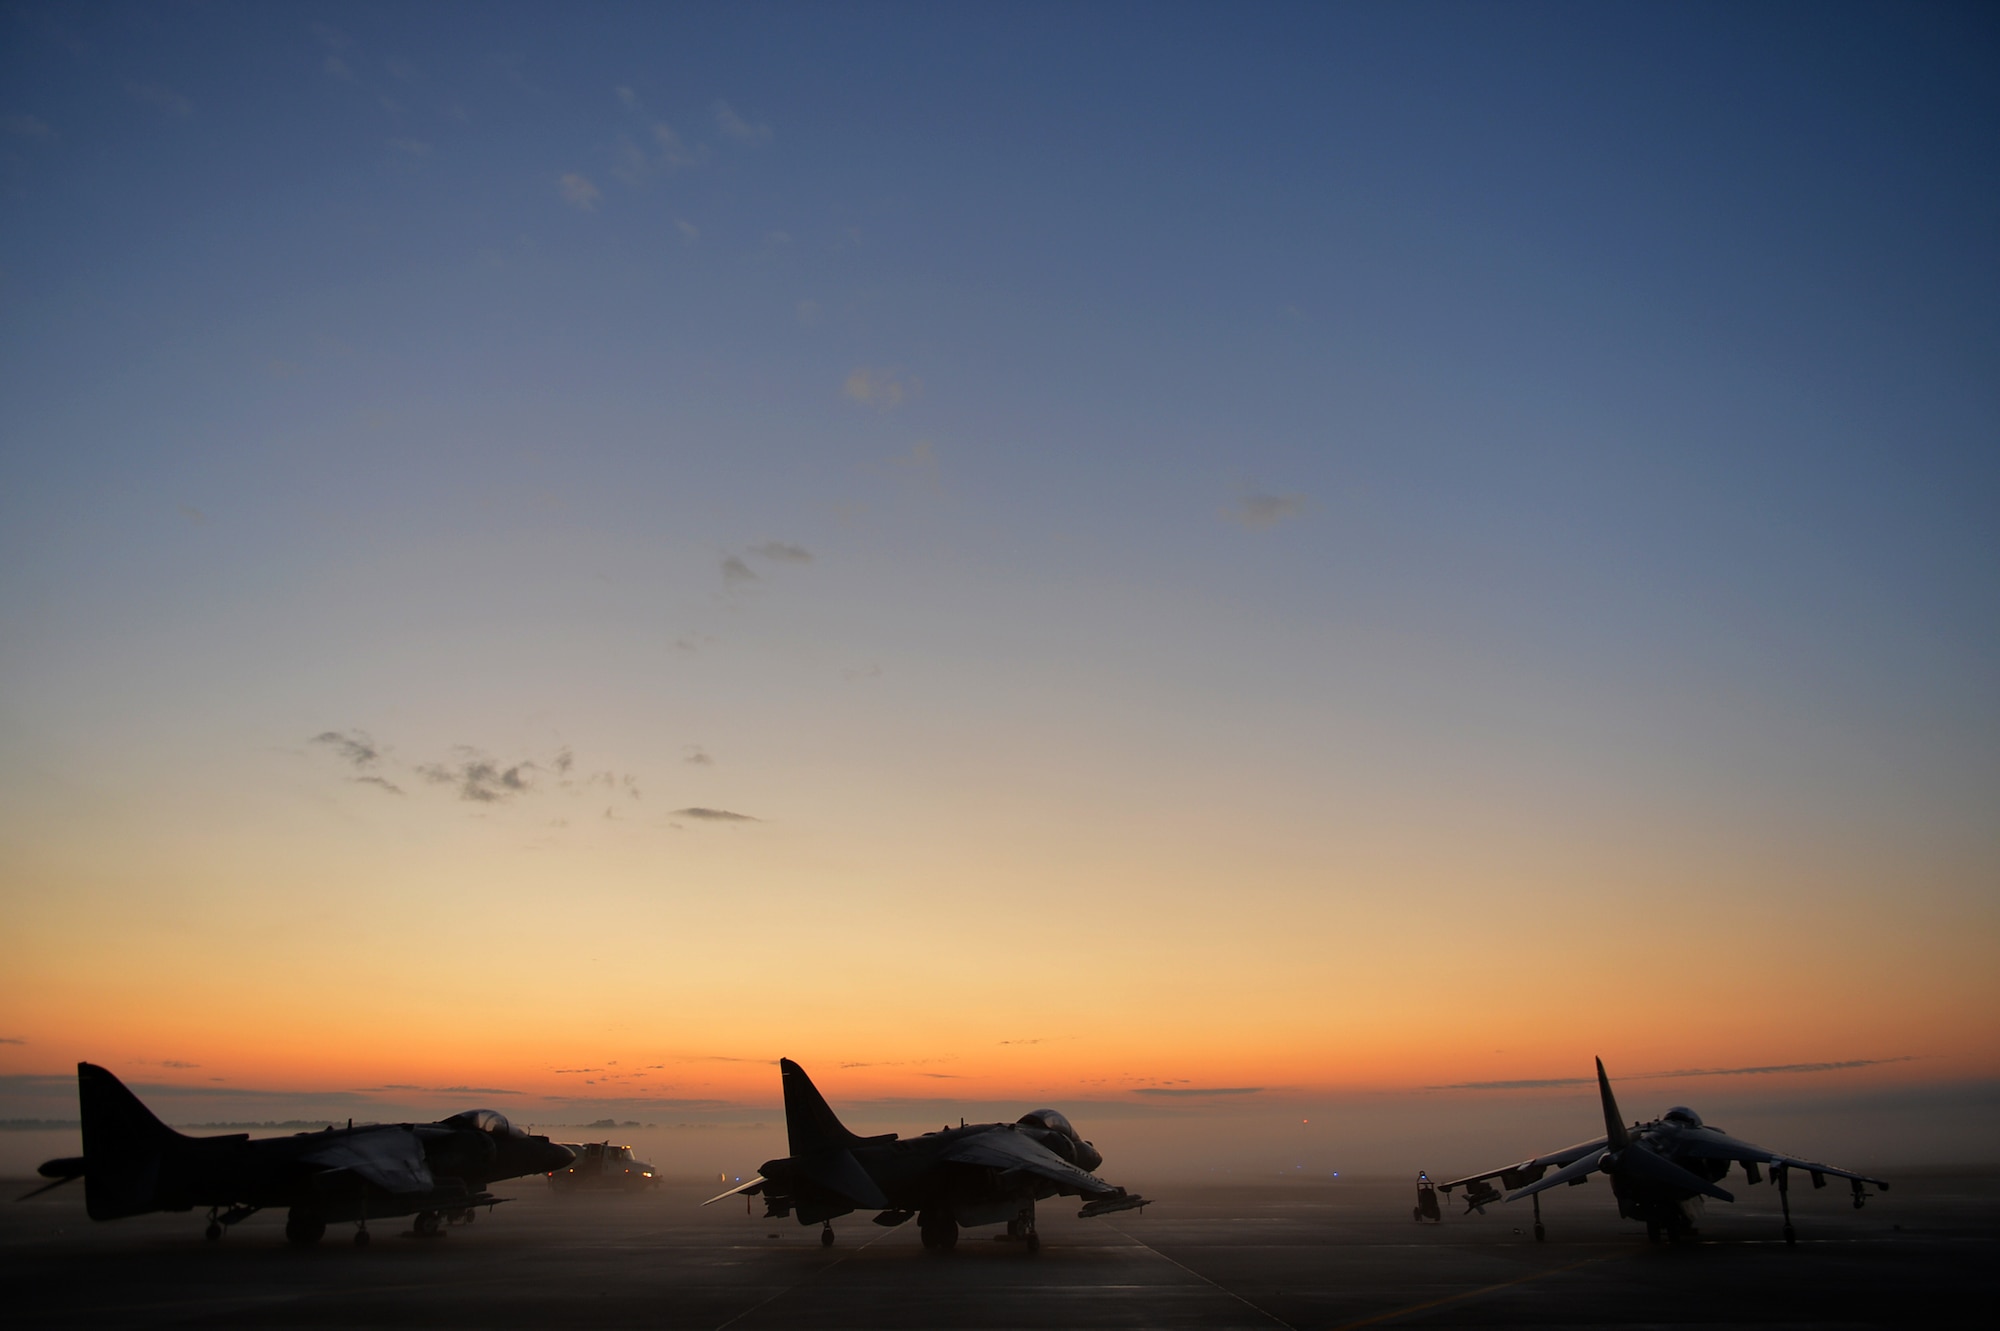 U.S. Marine AV-8B Harriers with the Marine Attack Squadron 231 assigned to Marine Corps Air Station Cherry Point, N.C., are parked on the flightline during basic fighter maneuver training at Shaw Air Force Base, South Carolina, Dec. 1, 2017.